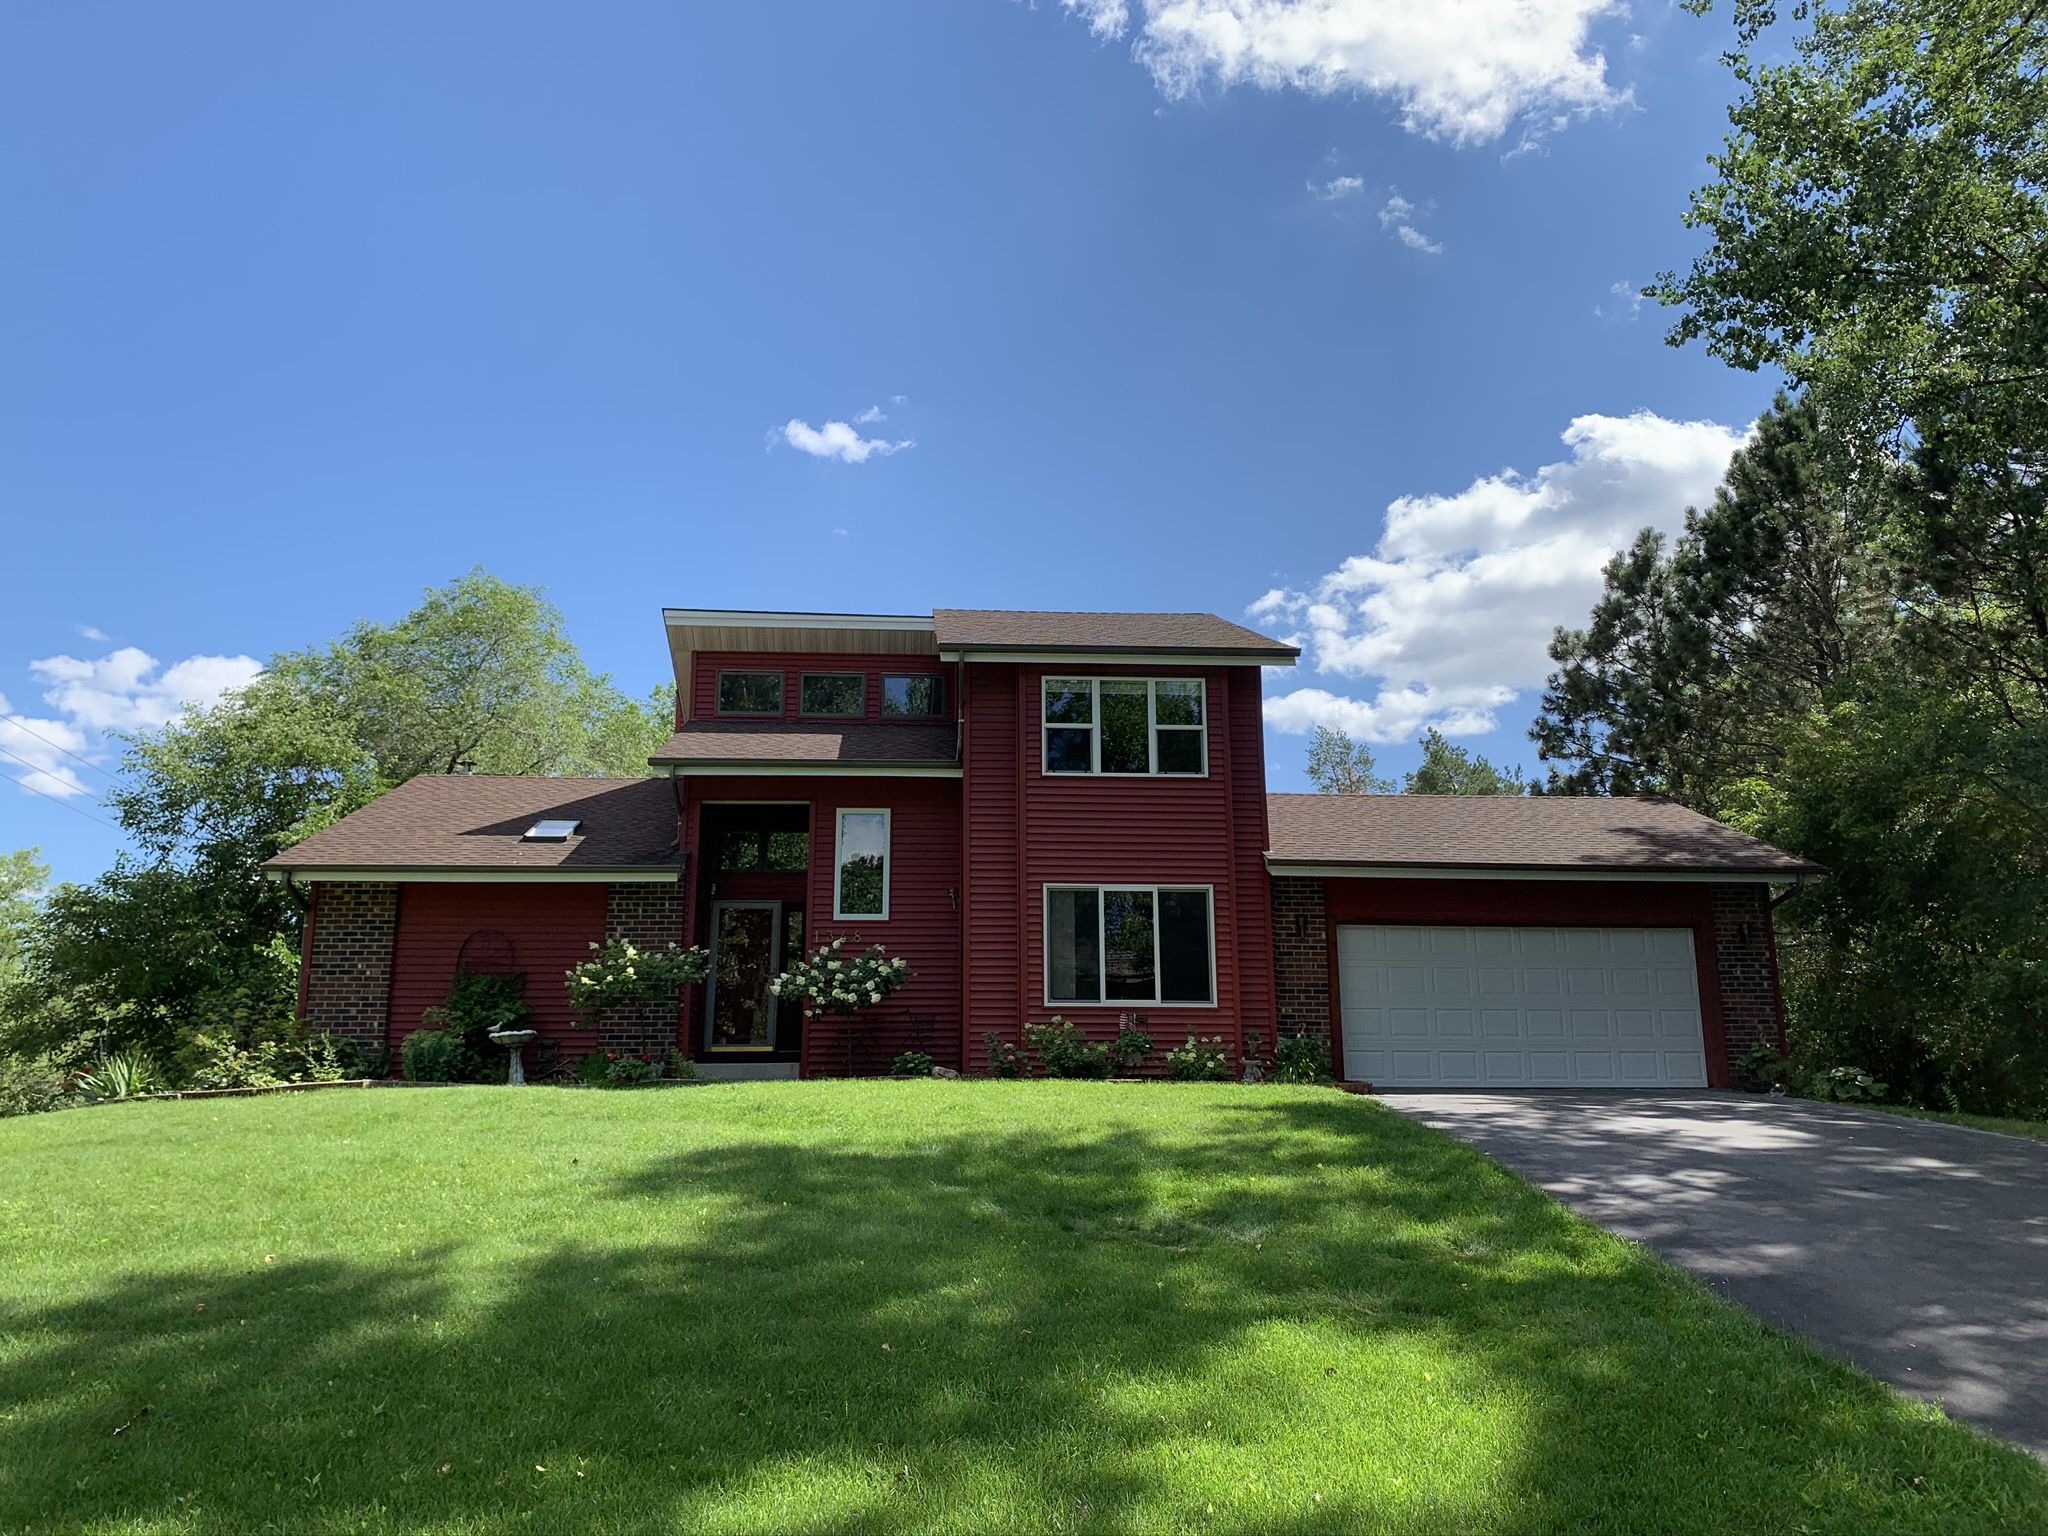  1348 Colleen Ave, Arden Hills, MN 55112, US